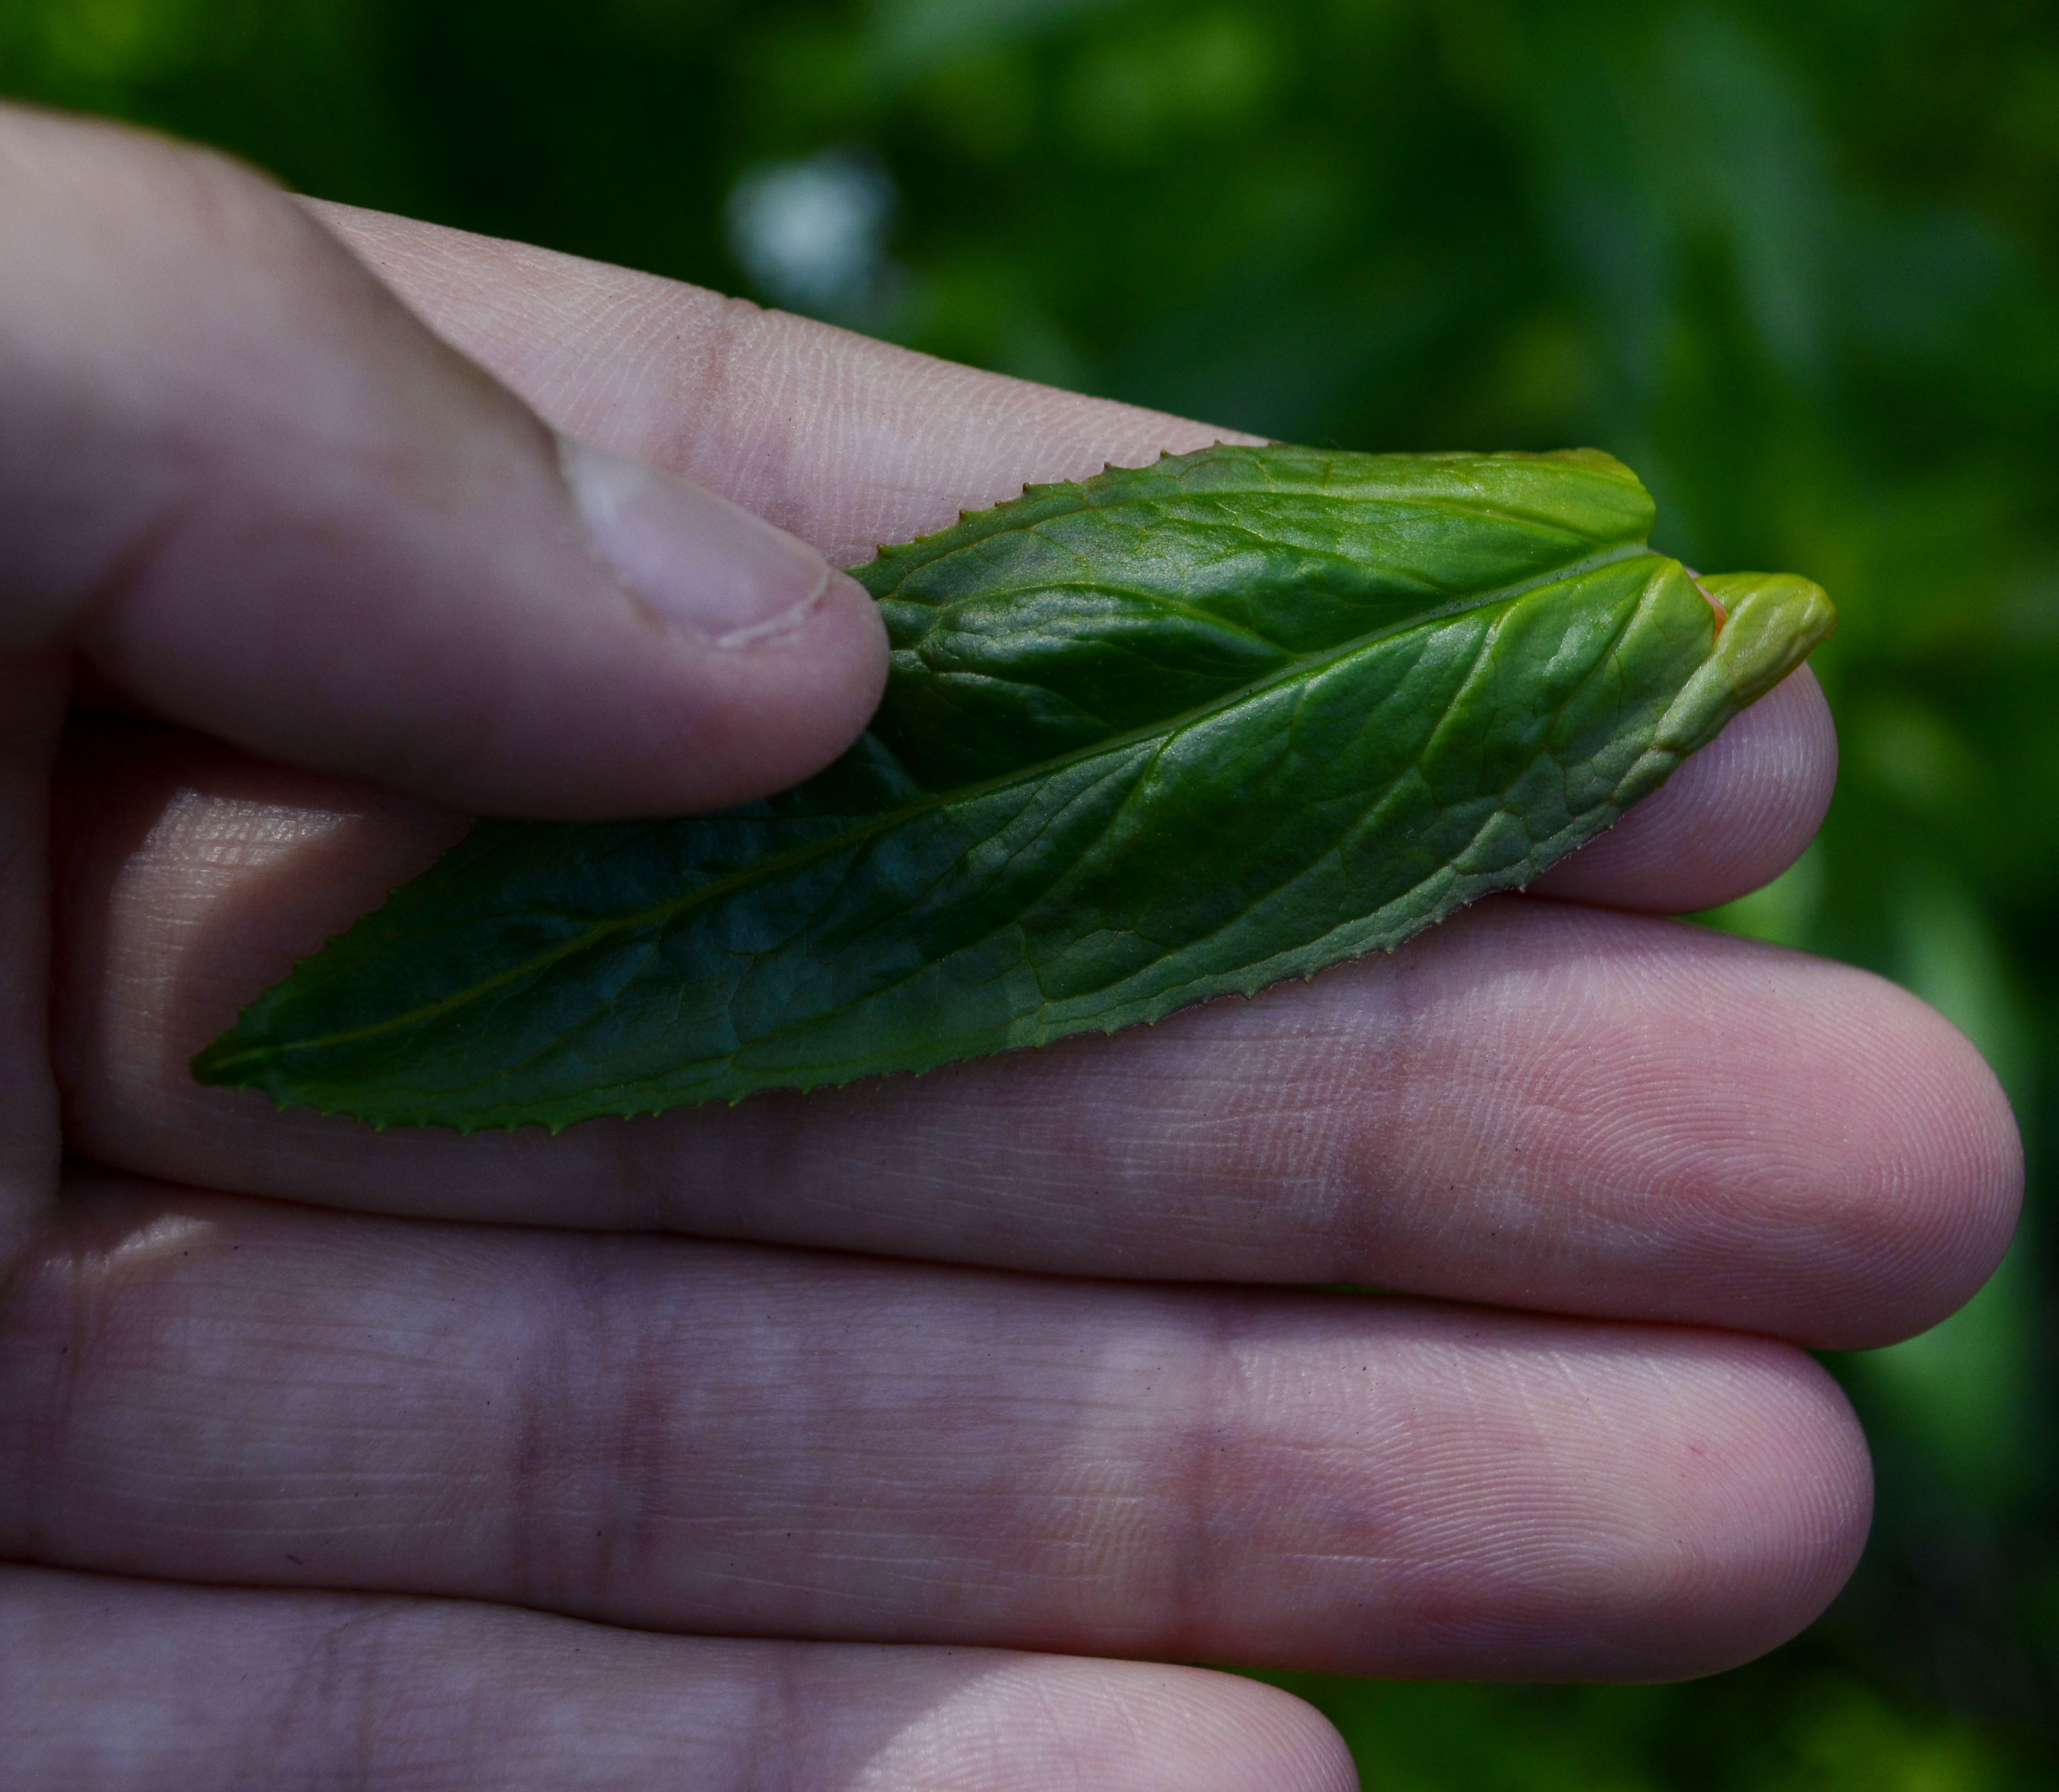 A lance-shaped leaf with finely toothed margins and prominent veins